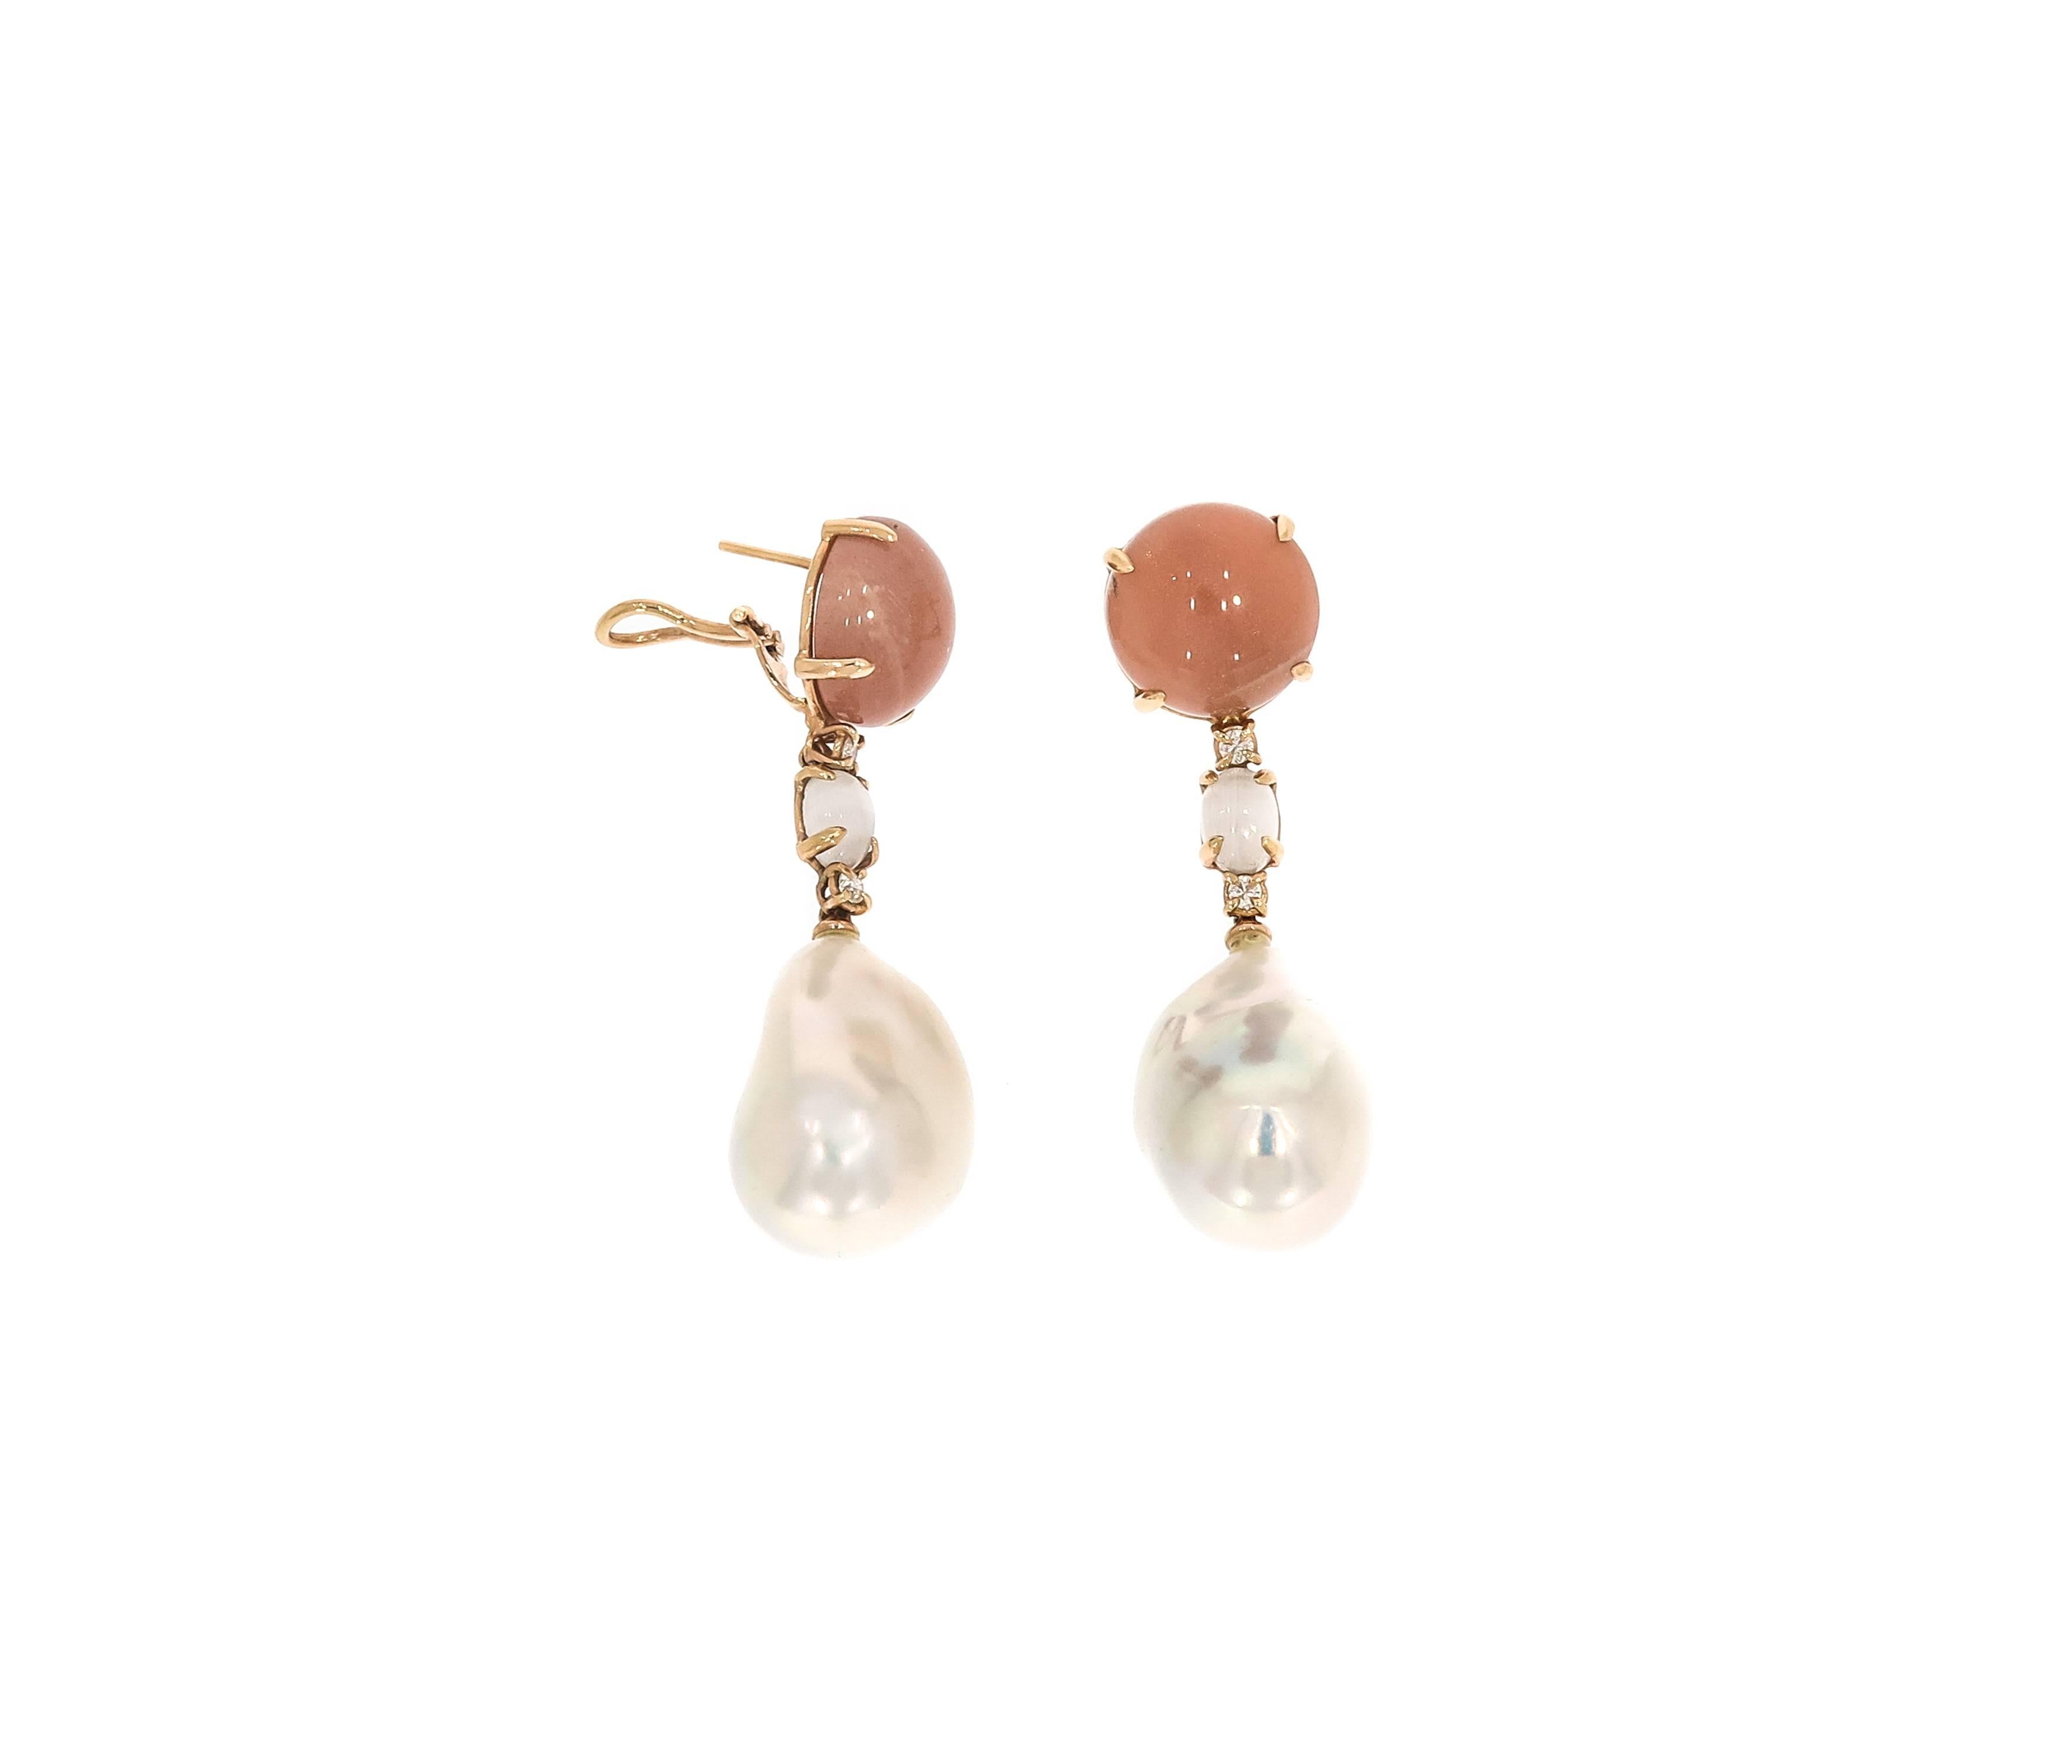 A Soft pastel look is achieved with this peach moonstone mixed with a soft white oval shaped moonstone, adding some diamond sparkles and complimenting below hangs beautifully a gorgeous pure white baroque pearl. 
This peach moonstone and pearl